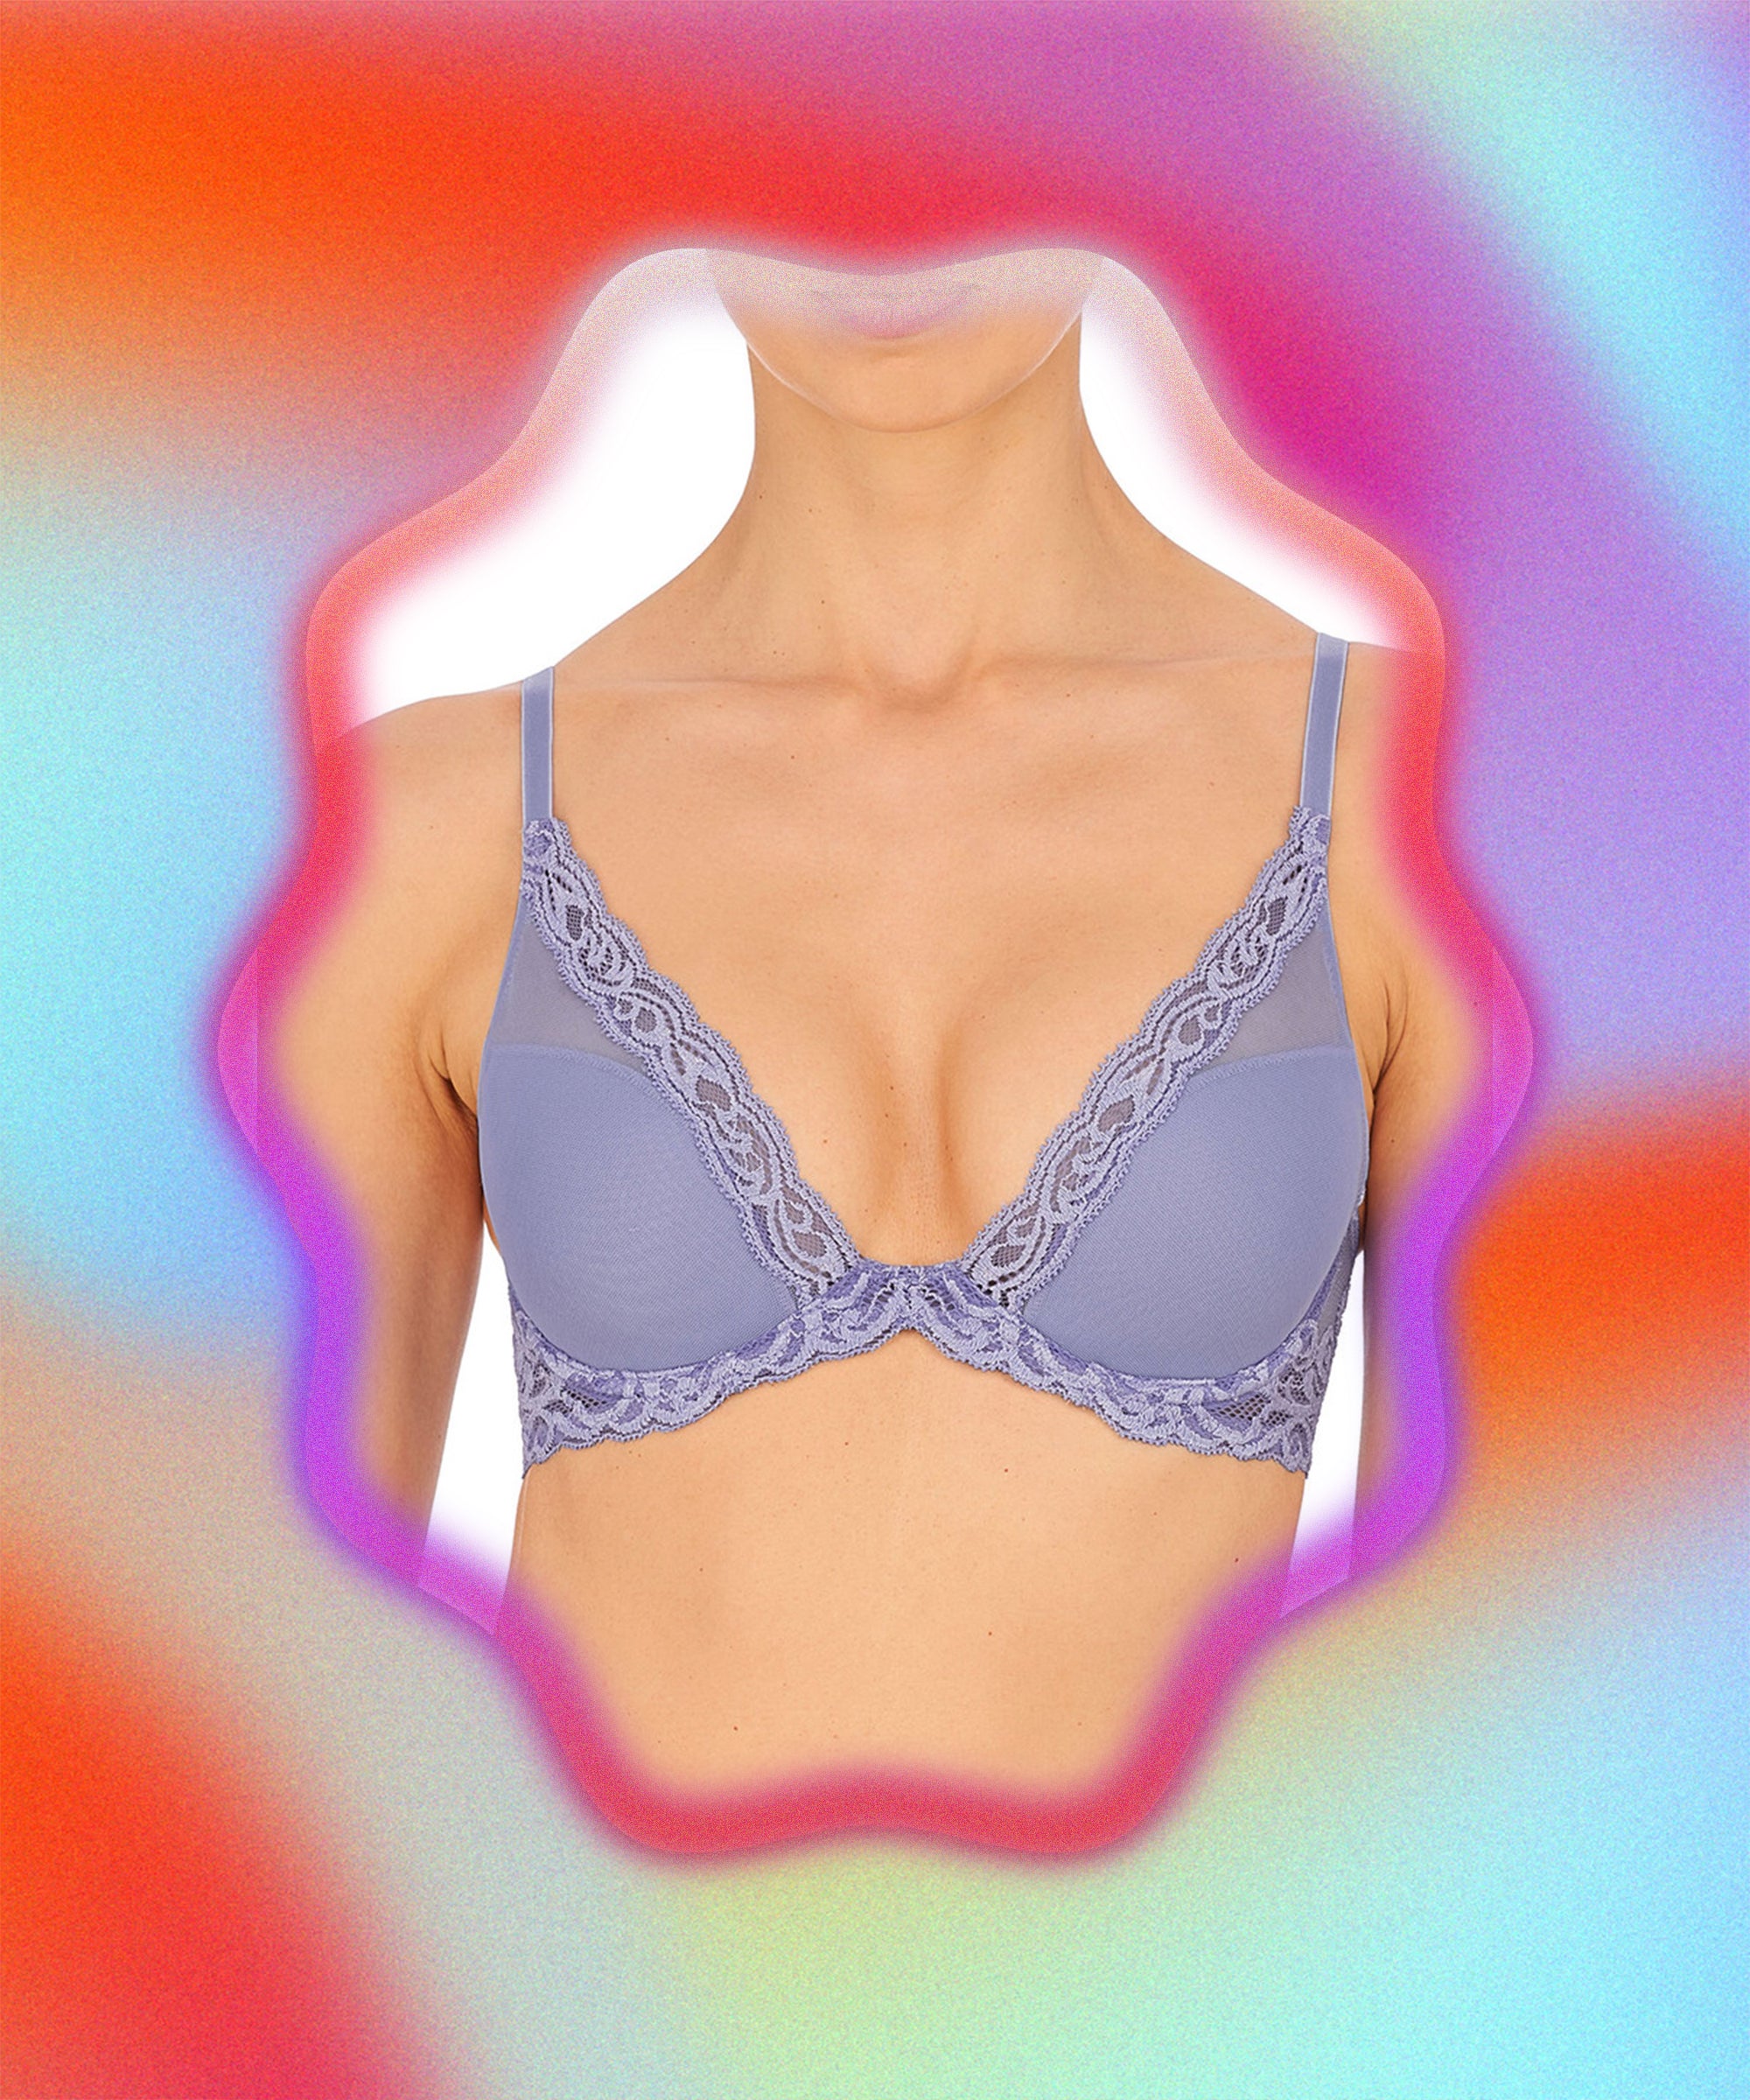 Who says bras have to be boring? 